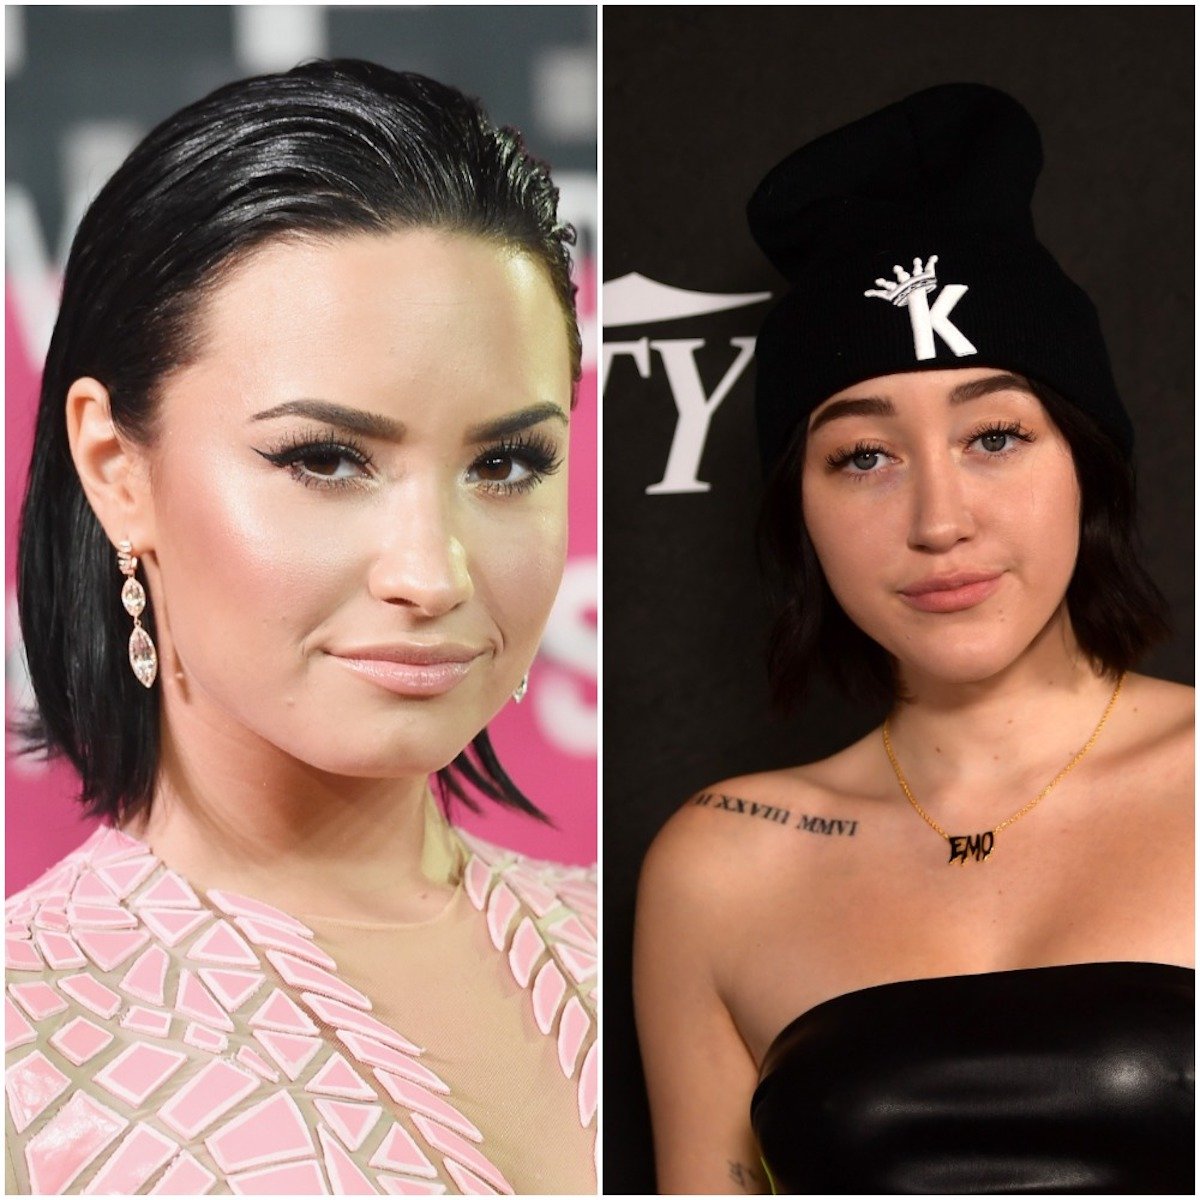 Demi Lovato with short black hair looking into the camera and Noah Cyrus posing with the hat